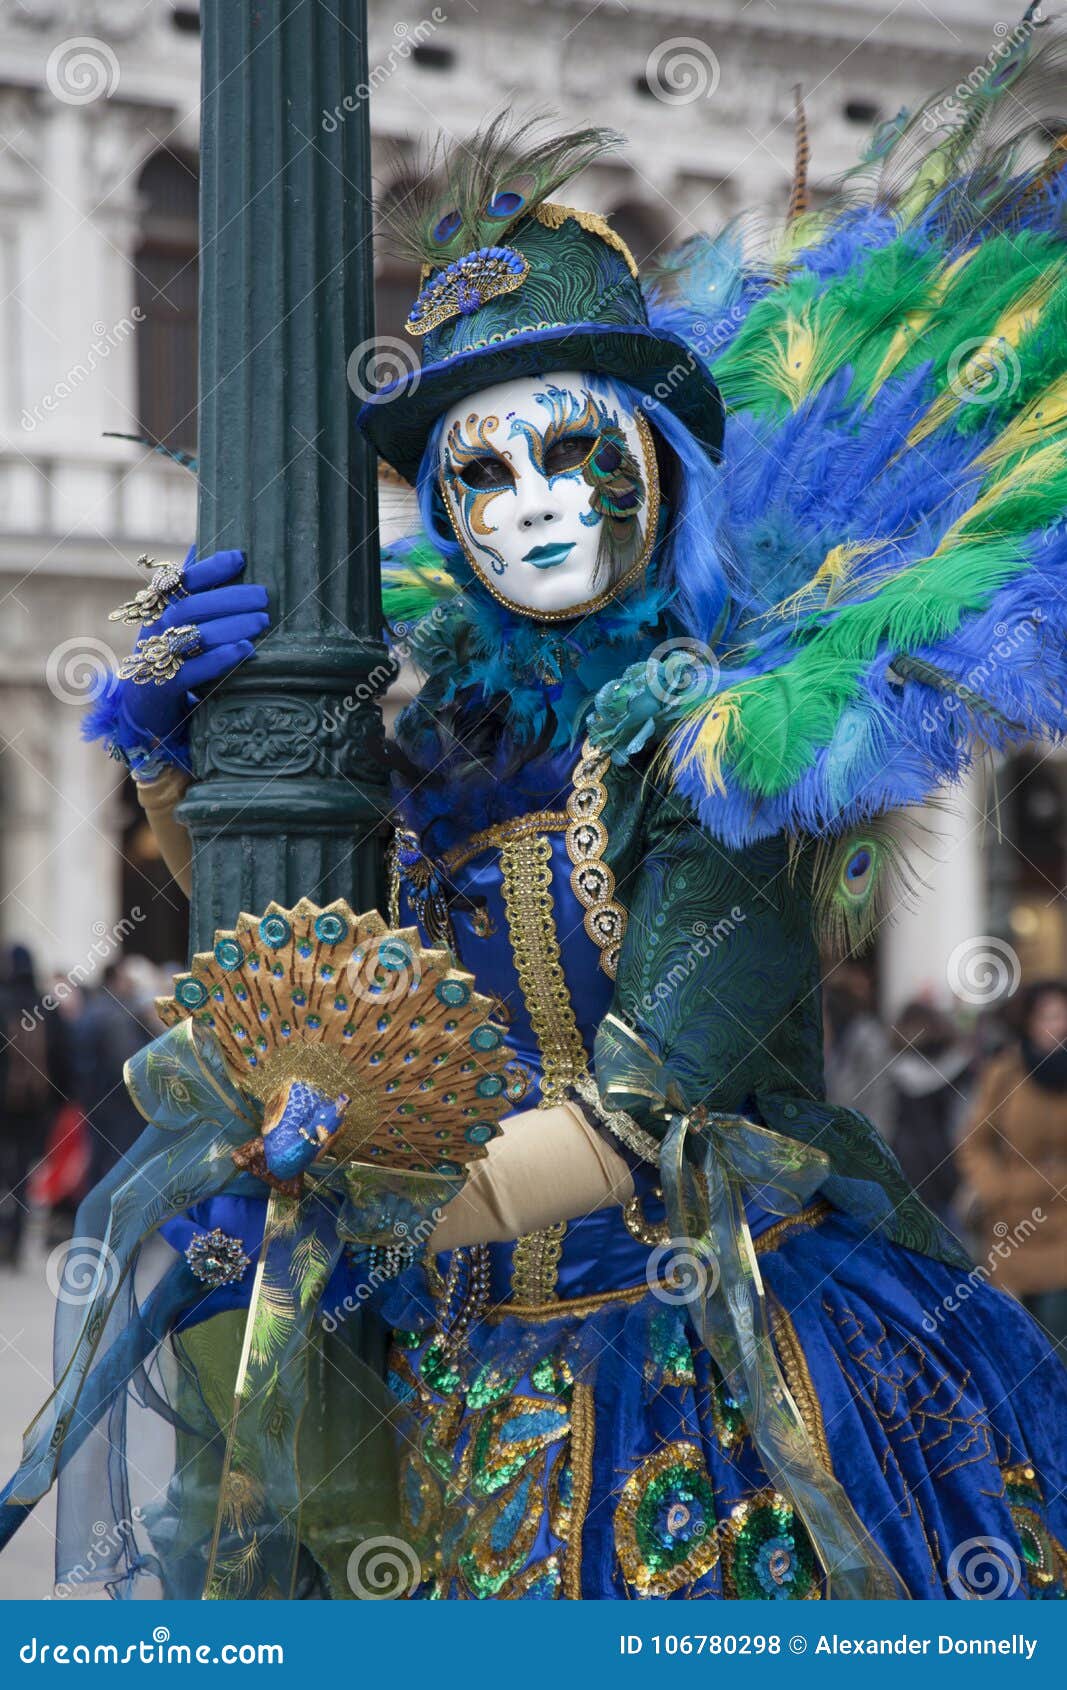 Yearly Venice Carnival Where People Wear a Wonderful Carnival Costume ...